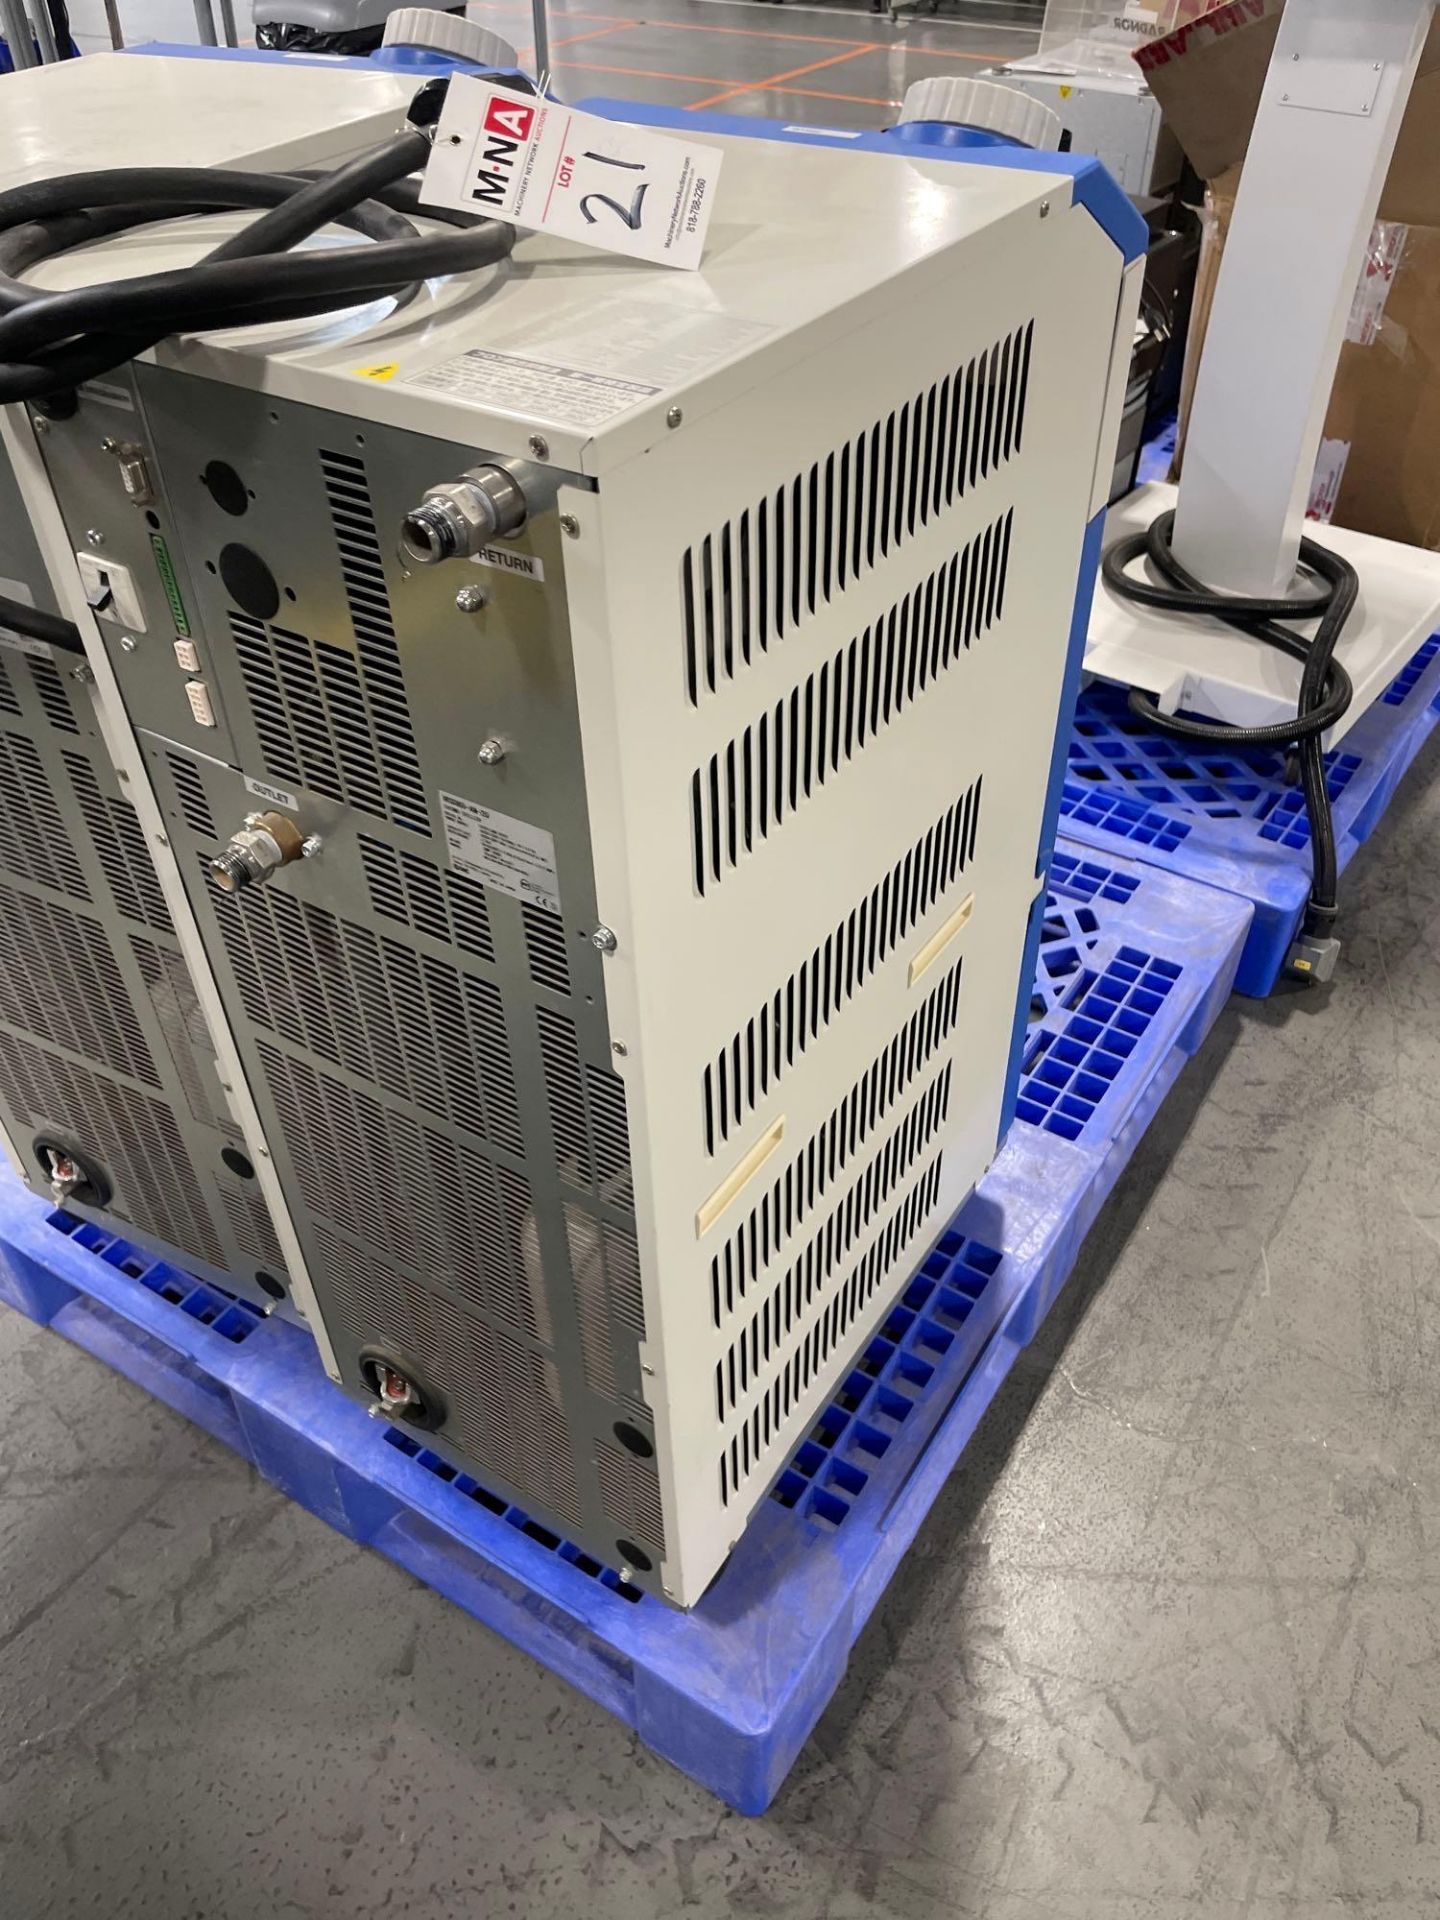 SMC HRS060-AN-20 Thermo Chiller, New 2019 - Image 5 of 6